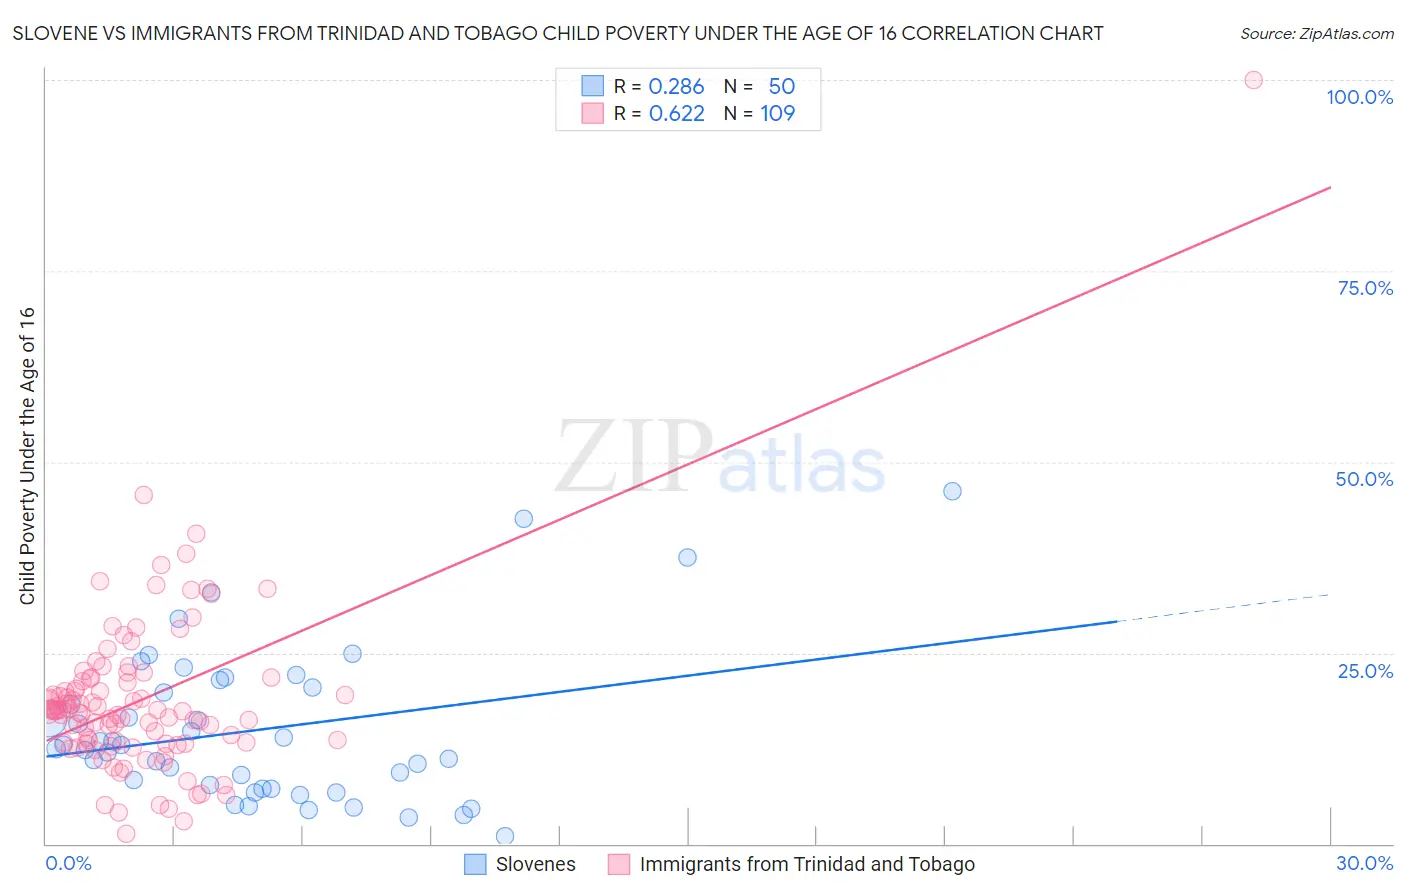 Slovene vs Immigrants from Trinidad and Tobago Child Poverty Under the Age of 16